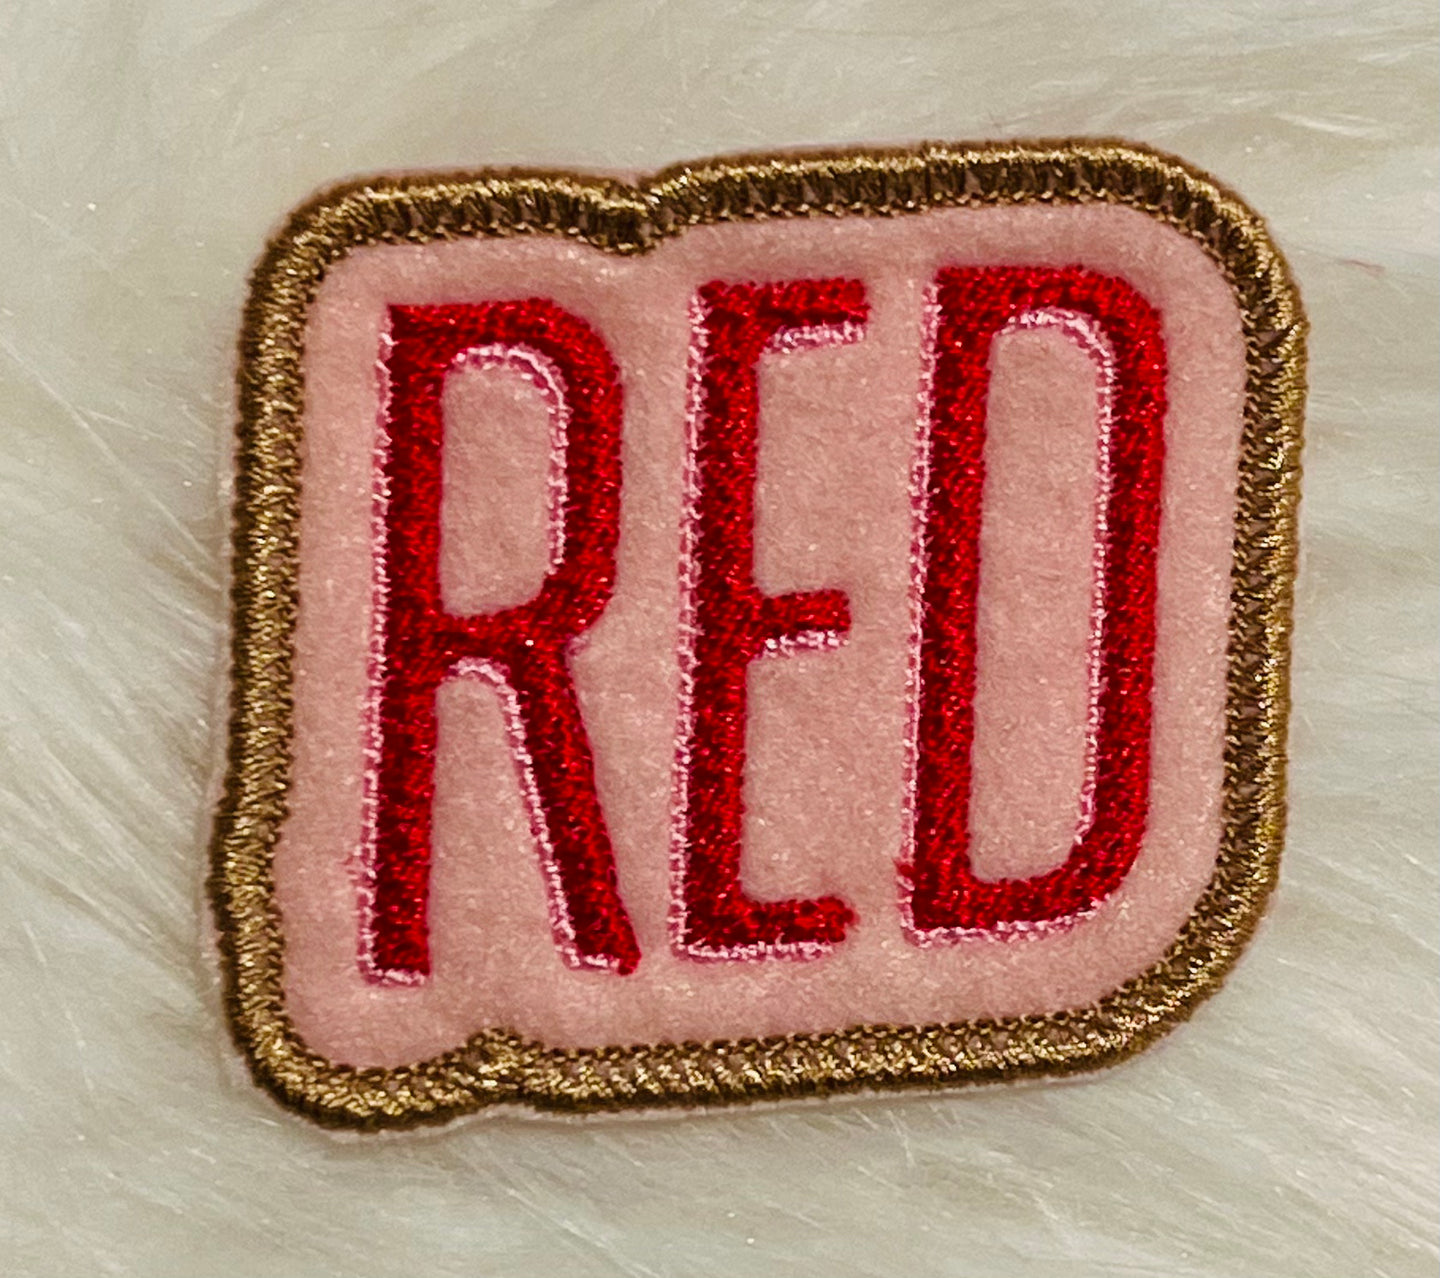 Taylor Swift patches : r/findfashion